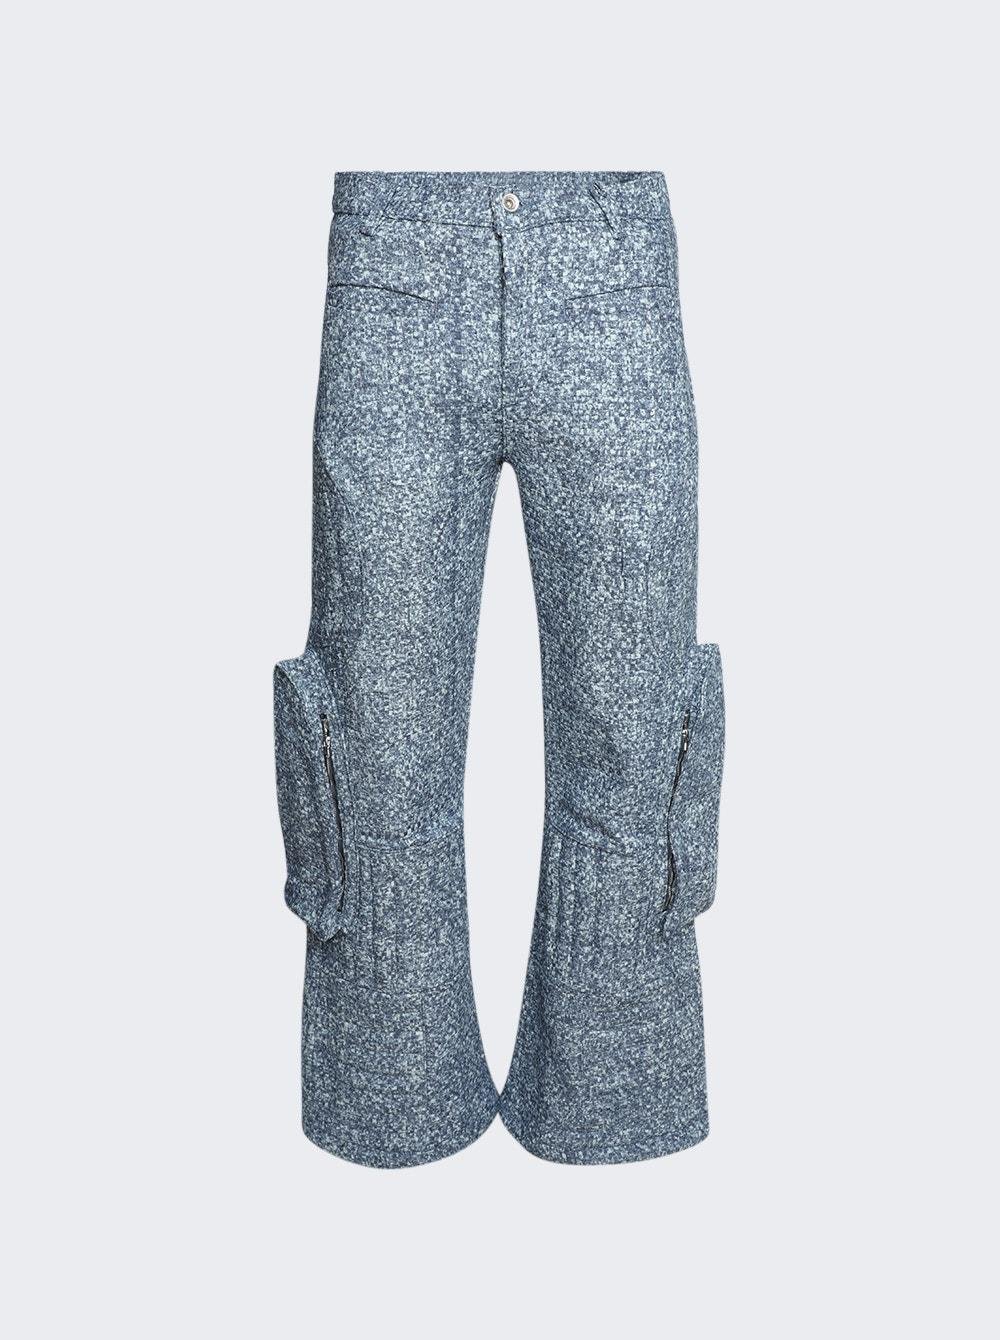 Raised Window Pants Indigo  | The Webster by WHO DECIDES WAR